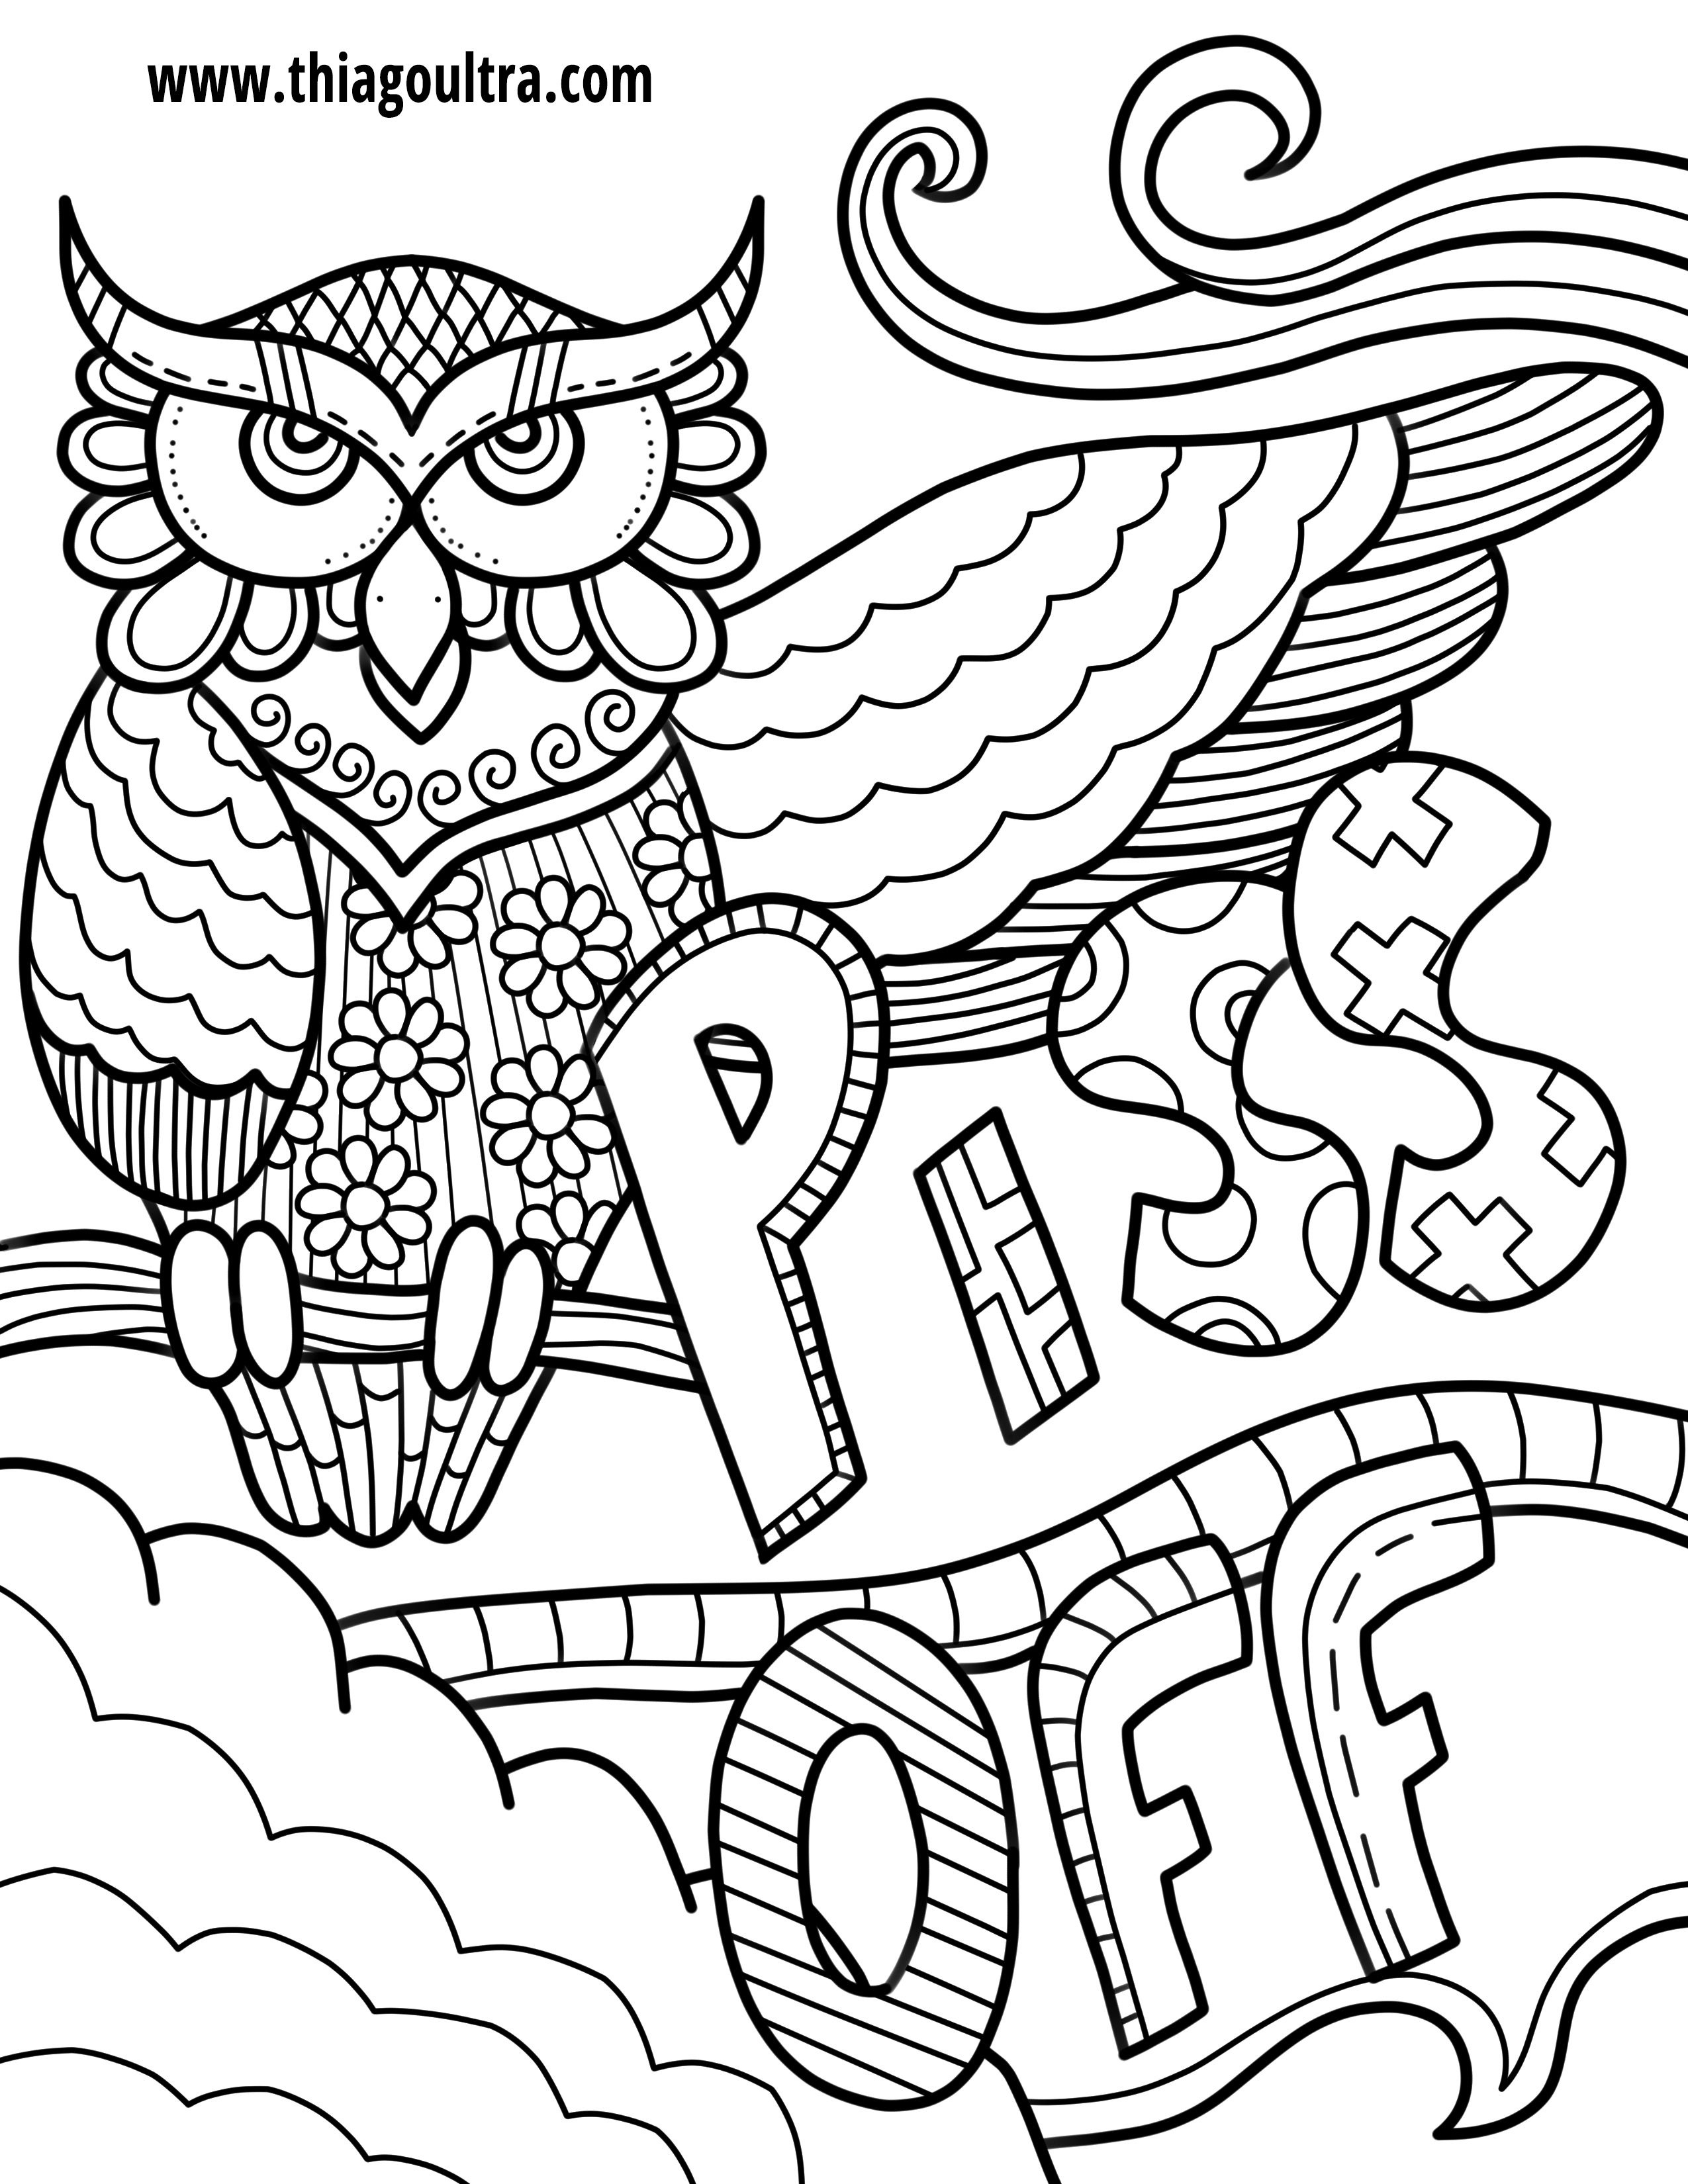 Challenge Free Printable Coloring Pages For Adults Only Swear Words - Swear Word Coloring Pages Printable Free